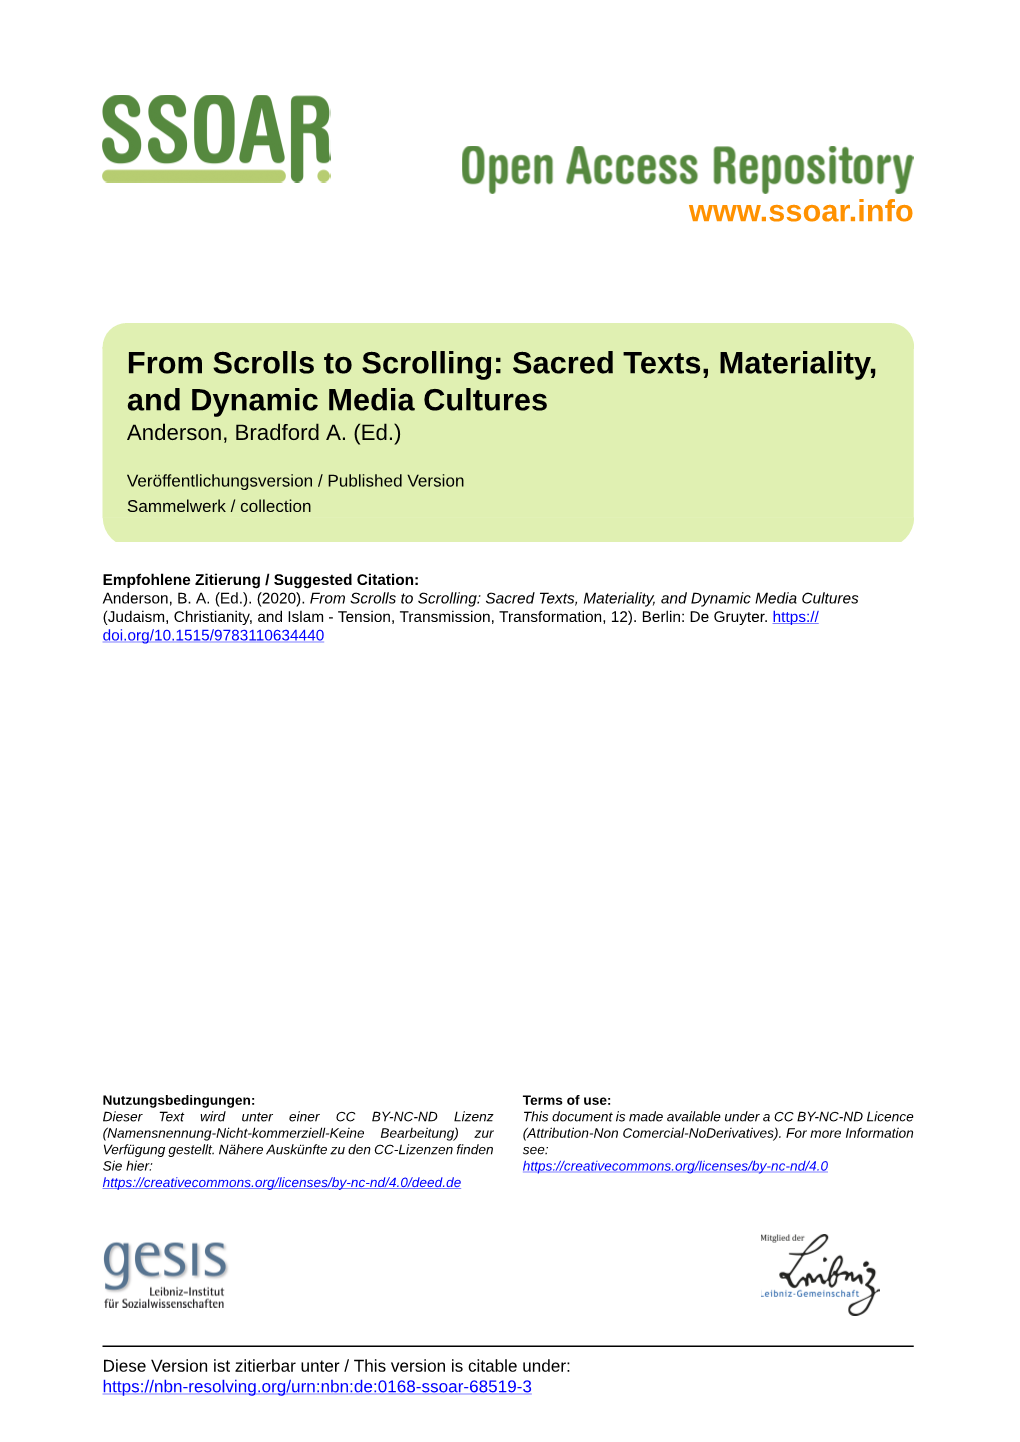 From Scrolls to Scrolling: Sacred Texts, Materiality, and Dynamic Media Cultures Anderson, Bradford A